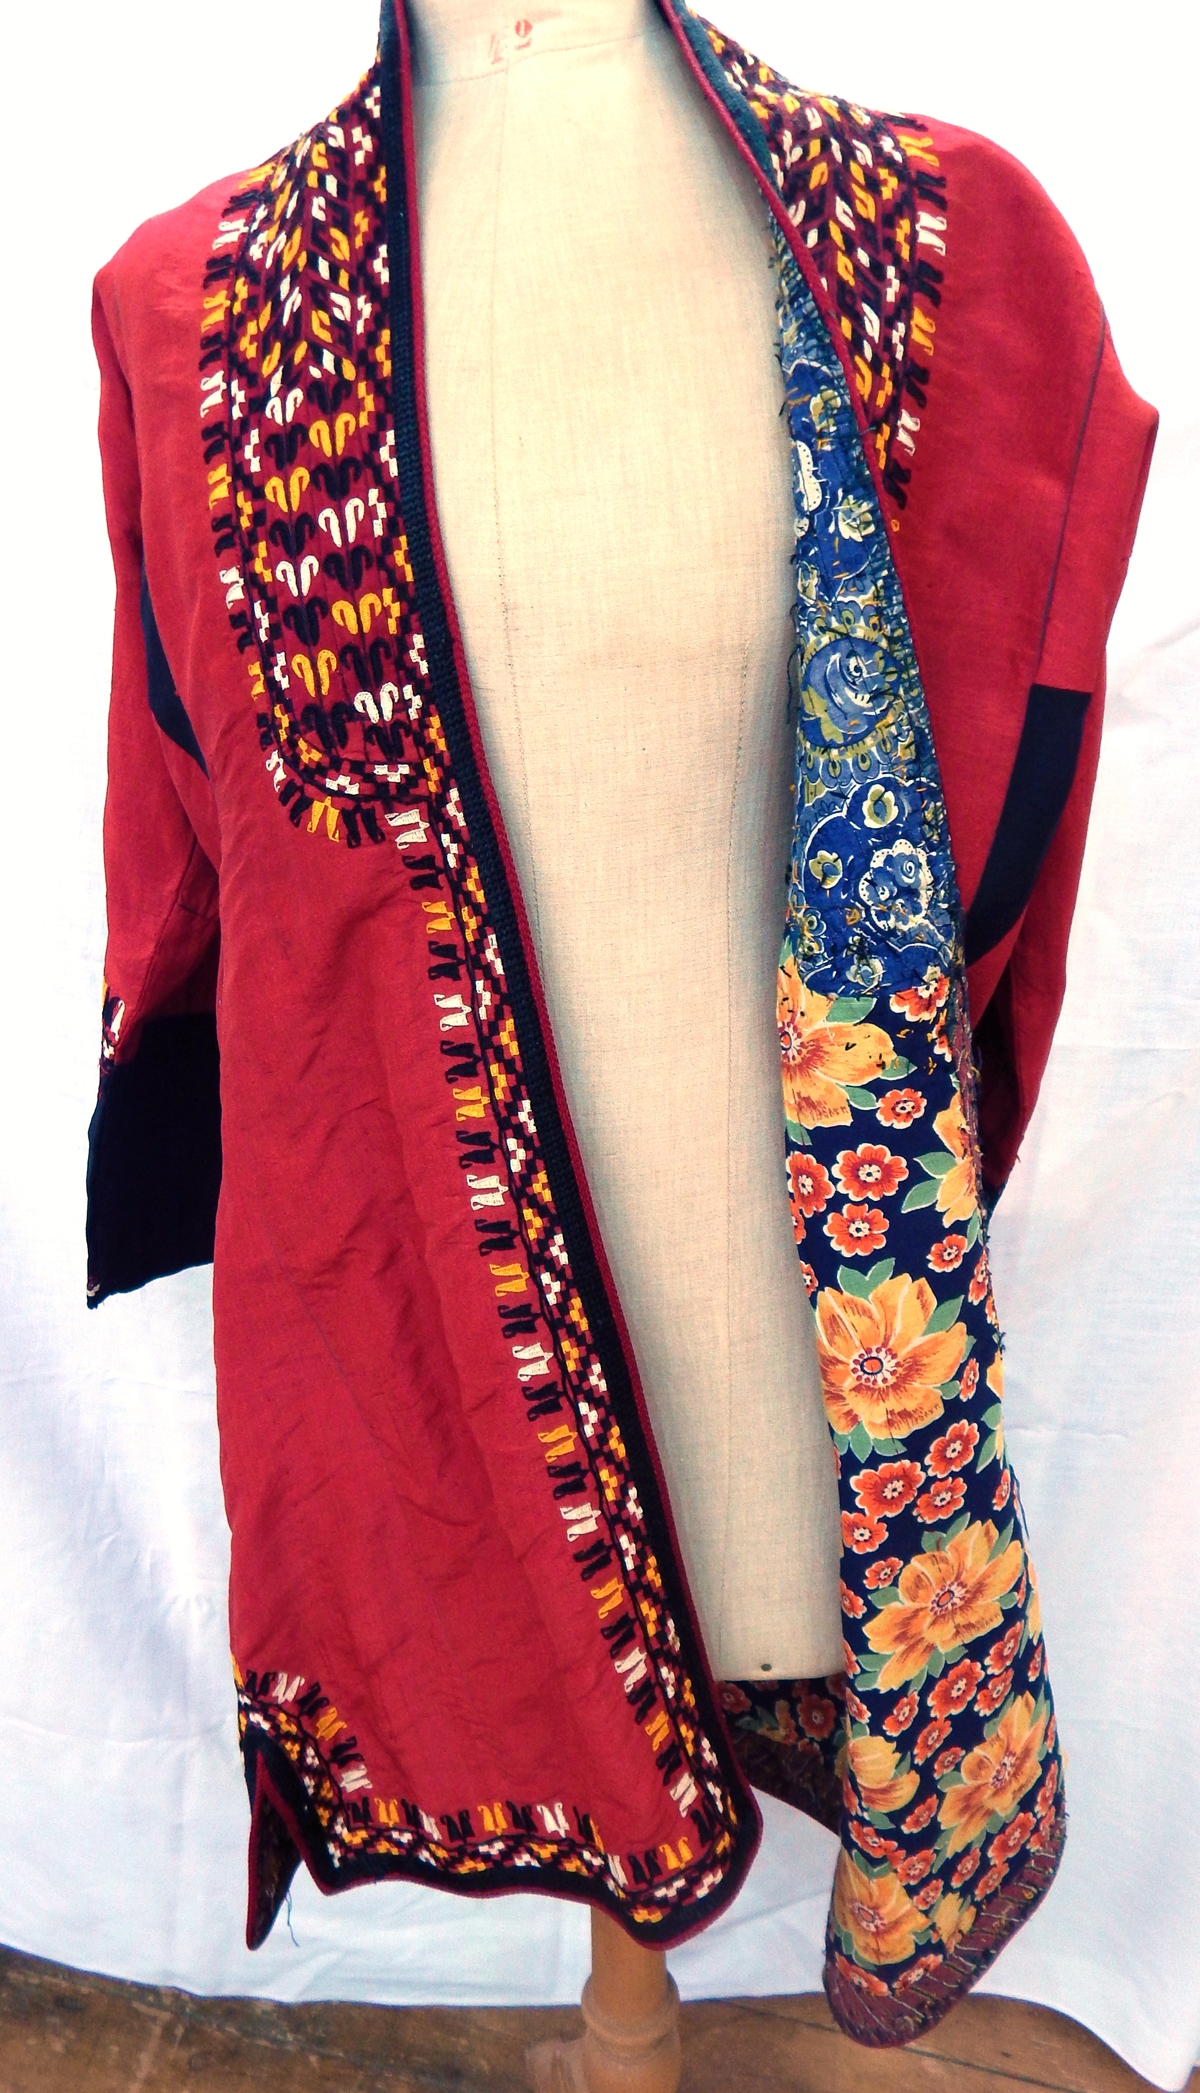 20th century Turkman robe in red adras with floral cotton linings and elaborate bands of black,